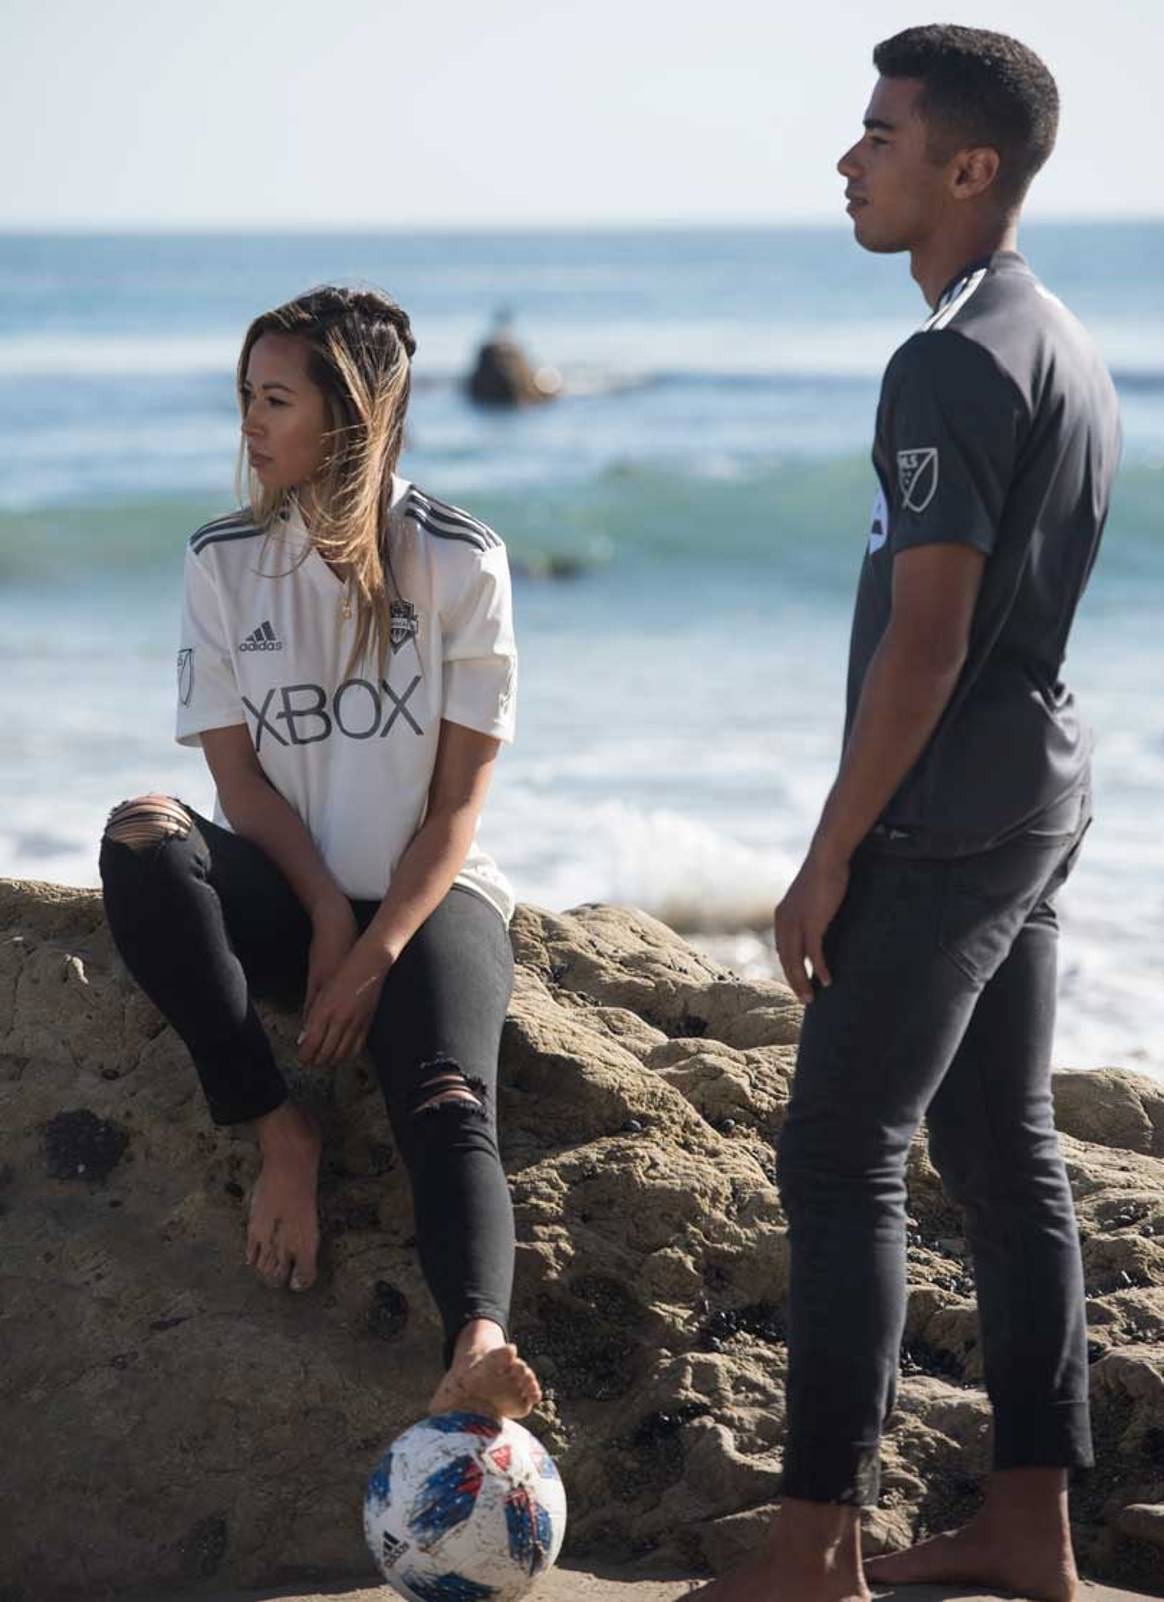 Adidas release football shirts made from upcycled plastic ocean waste